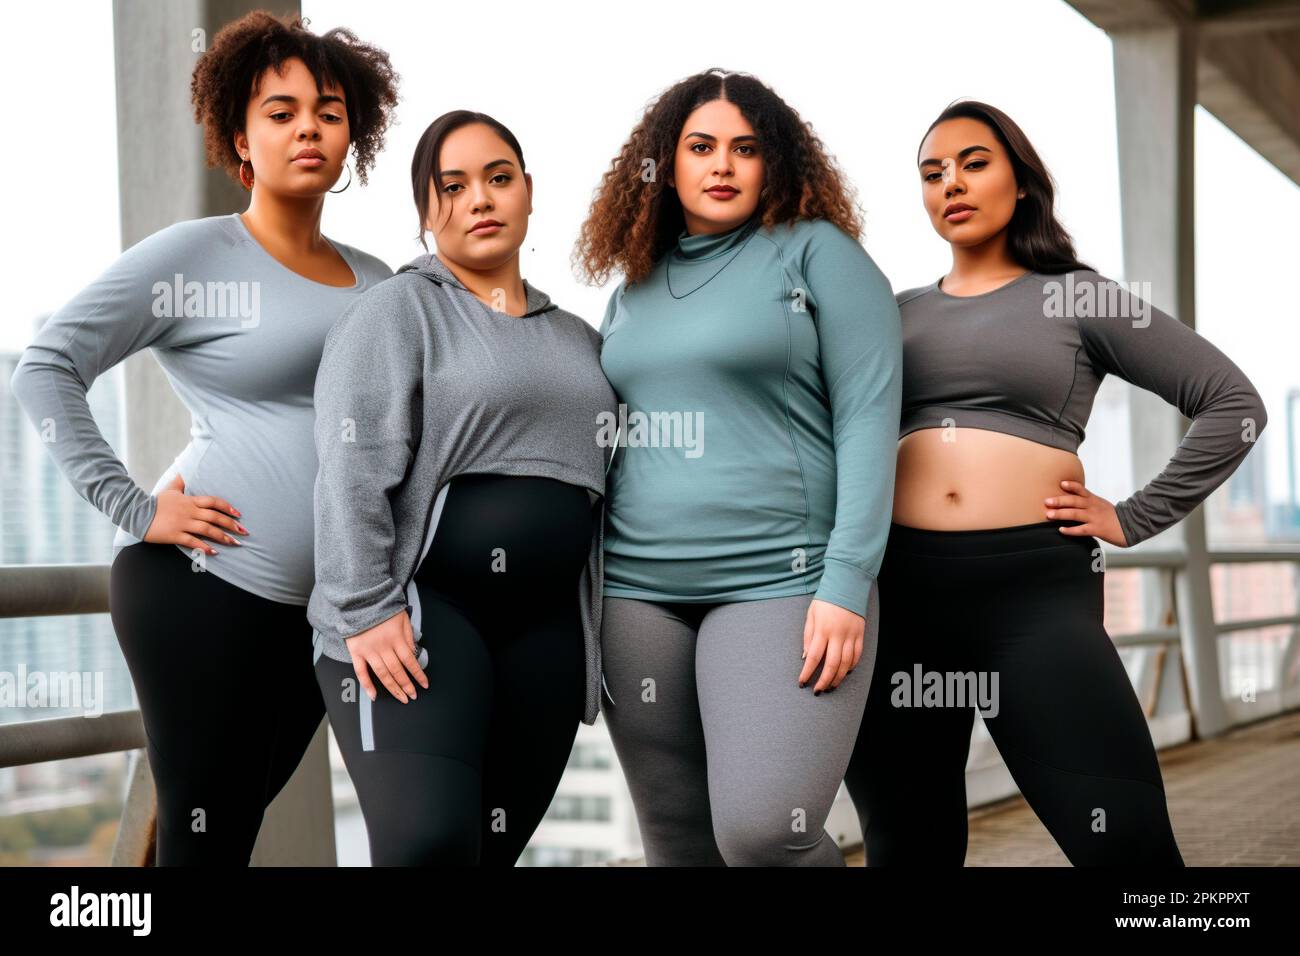 beautiful plus size women of different ethnicities posing Stock Photo